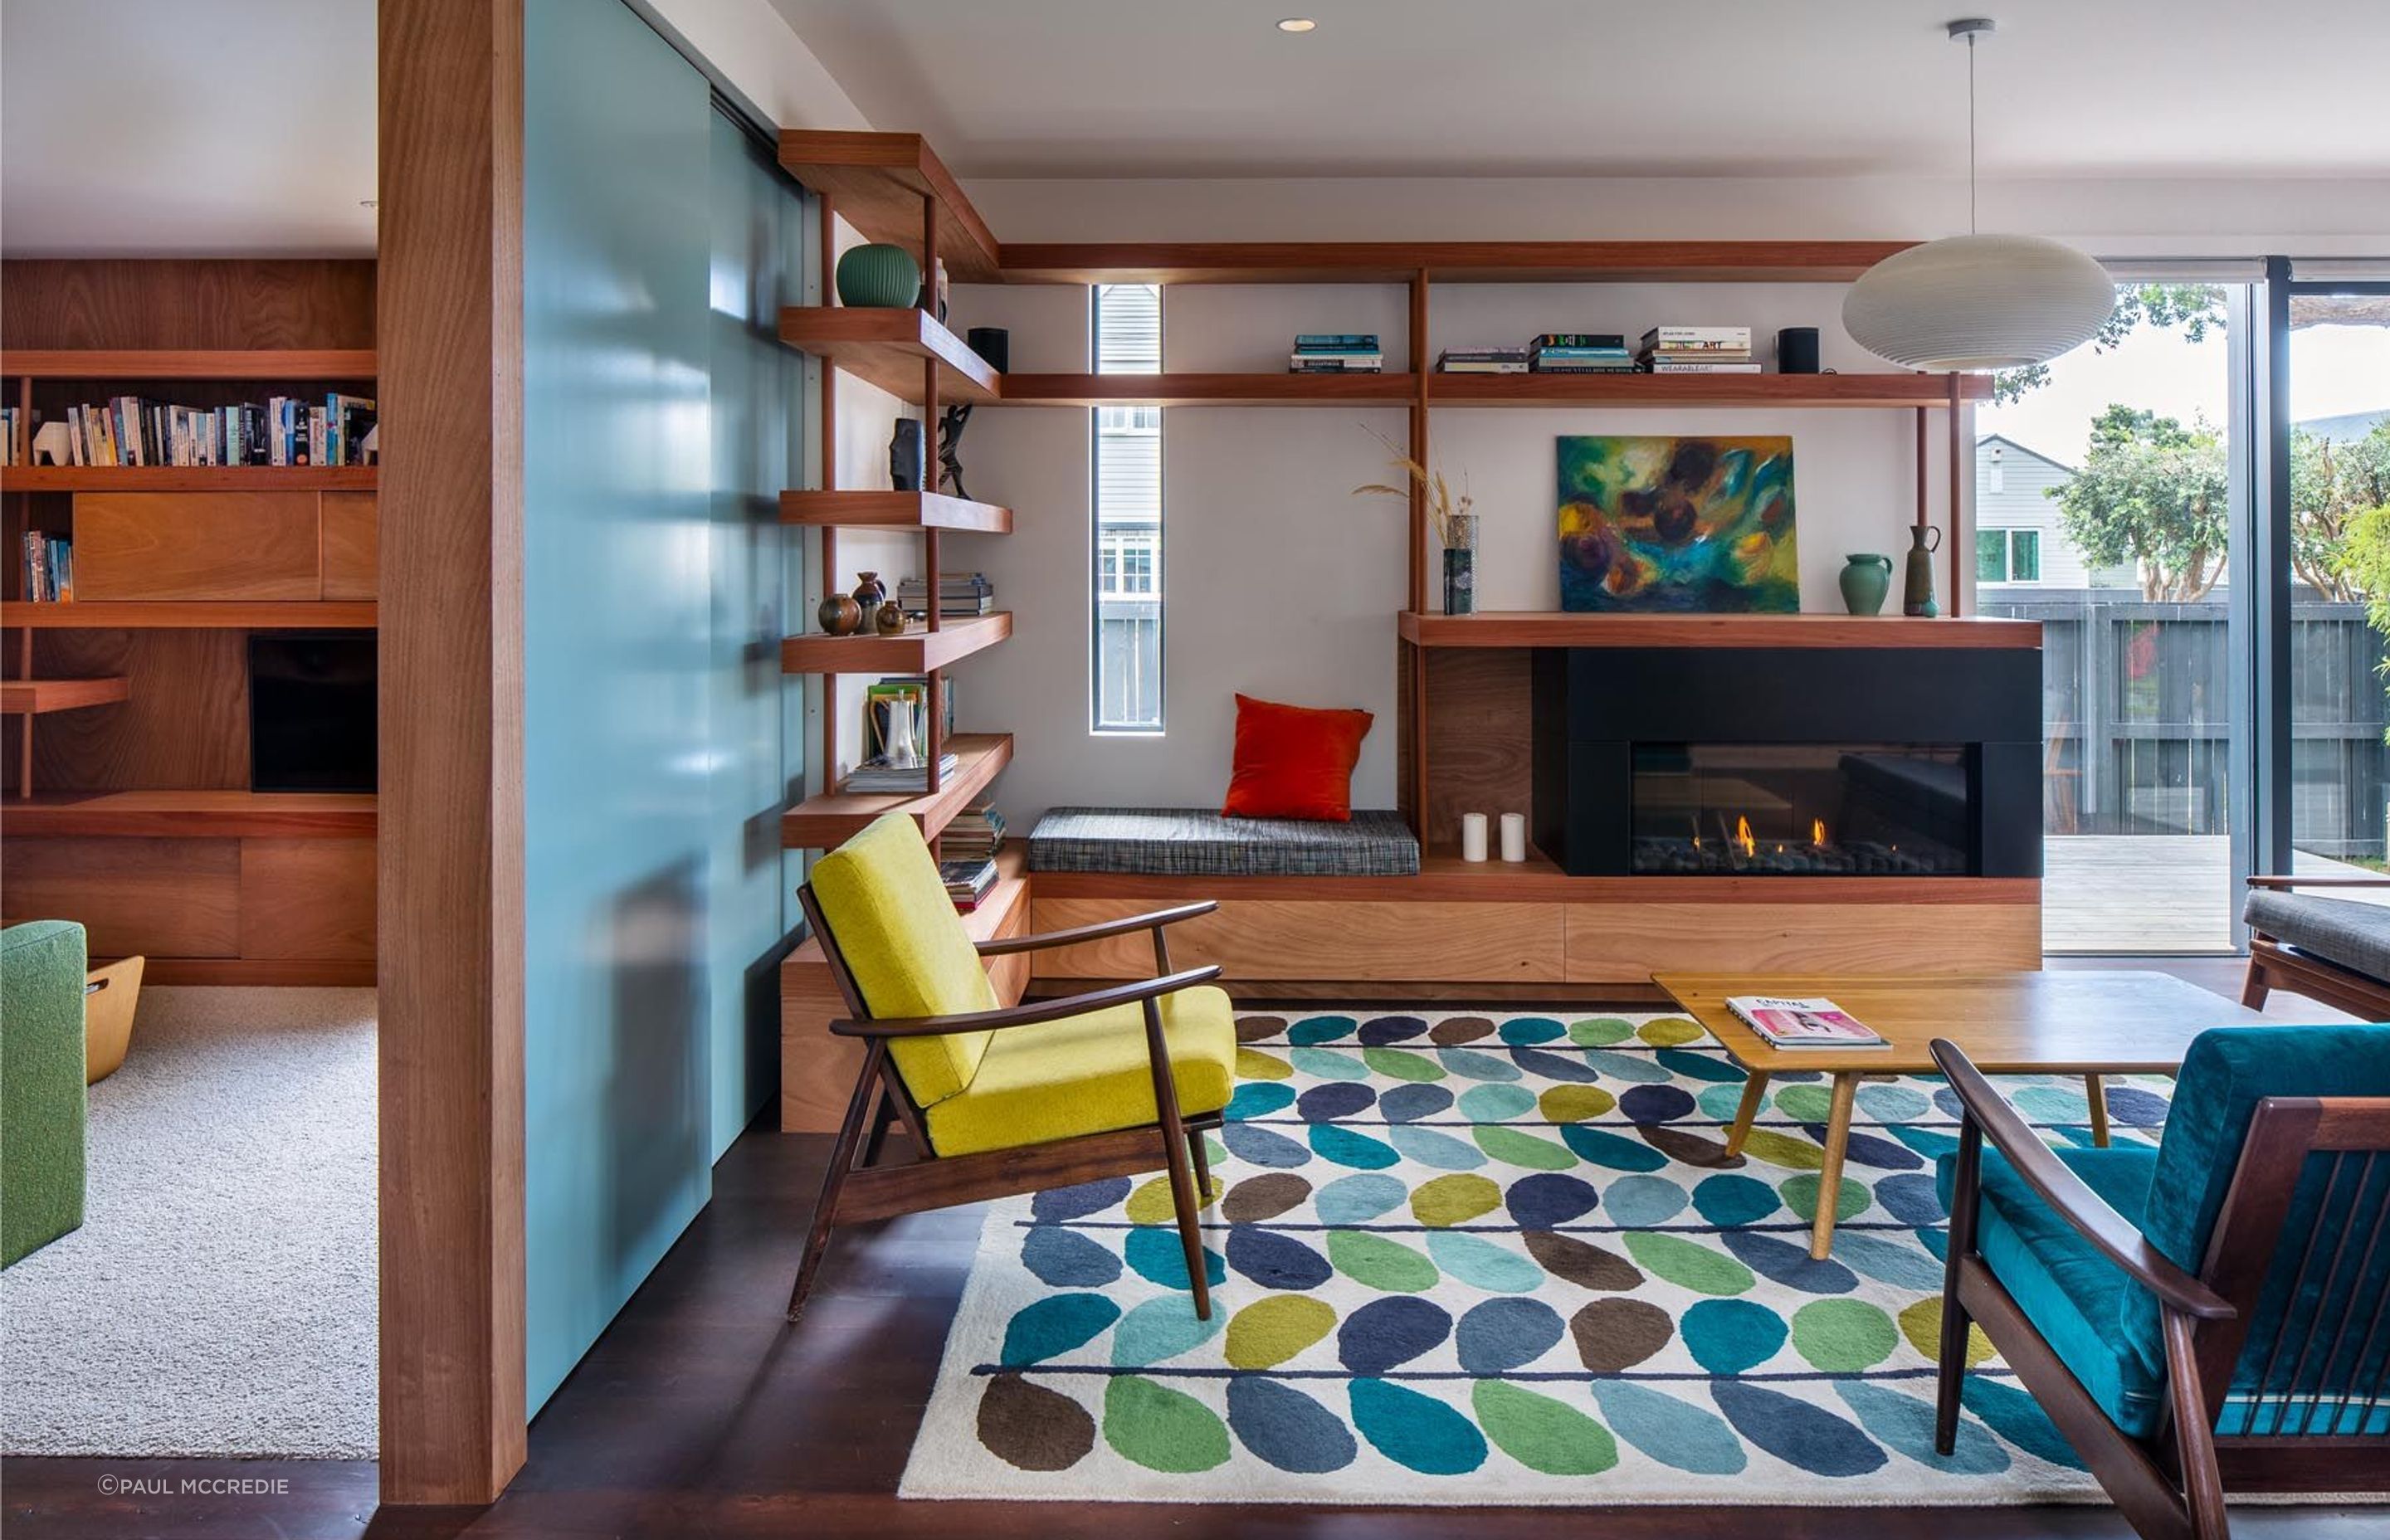 The built-in window seat is one of many options in the house for a sunny spot to sit. Sturdy timber shelving adds weight to the room, and the clients helped choose the mid-century furnishings.